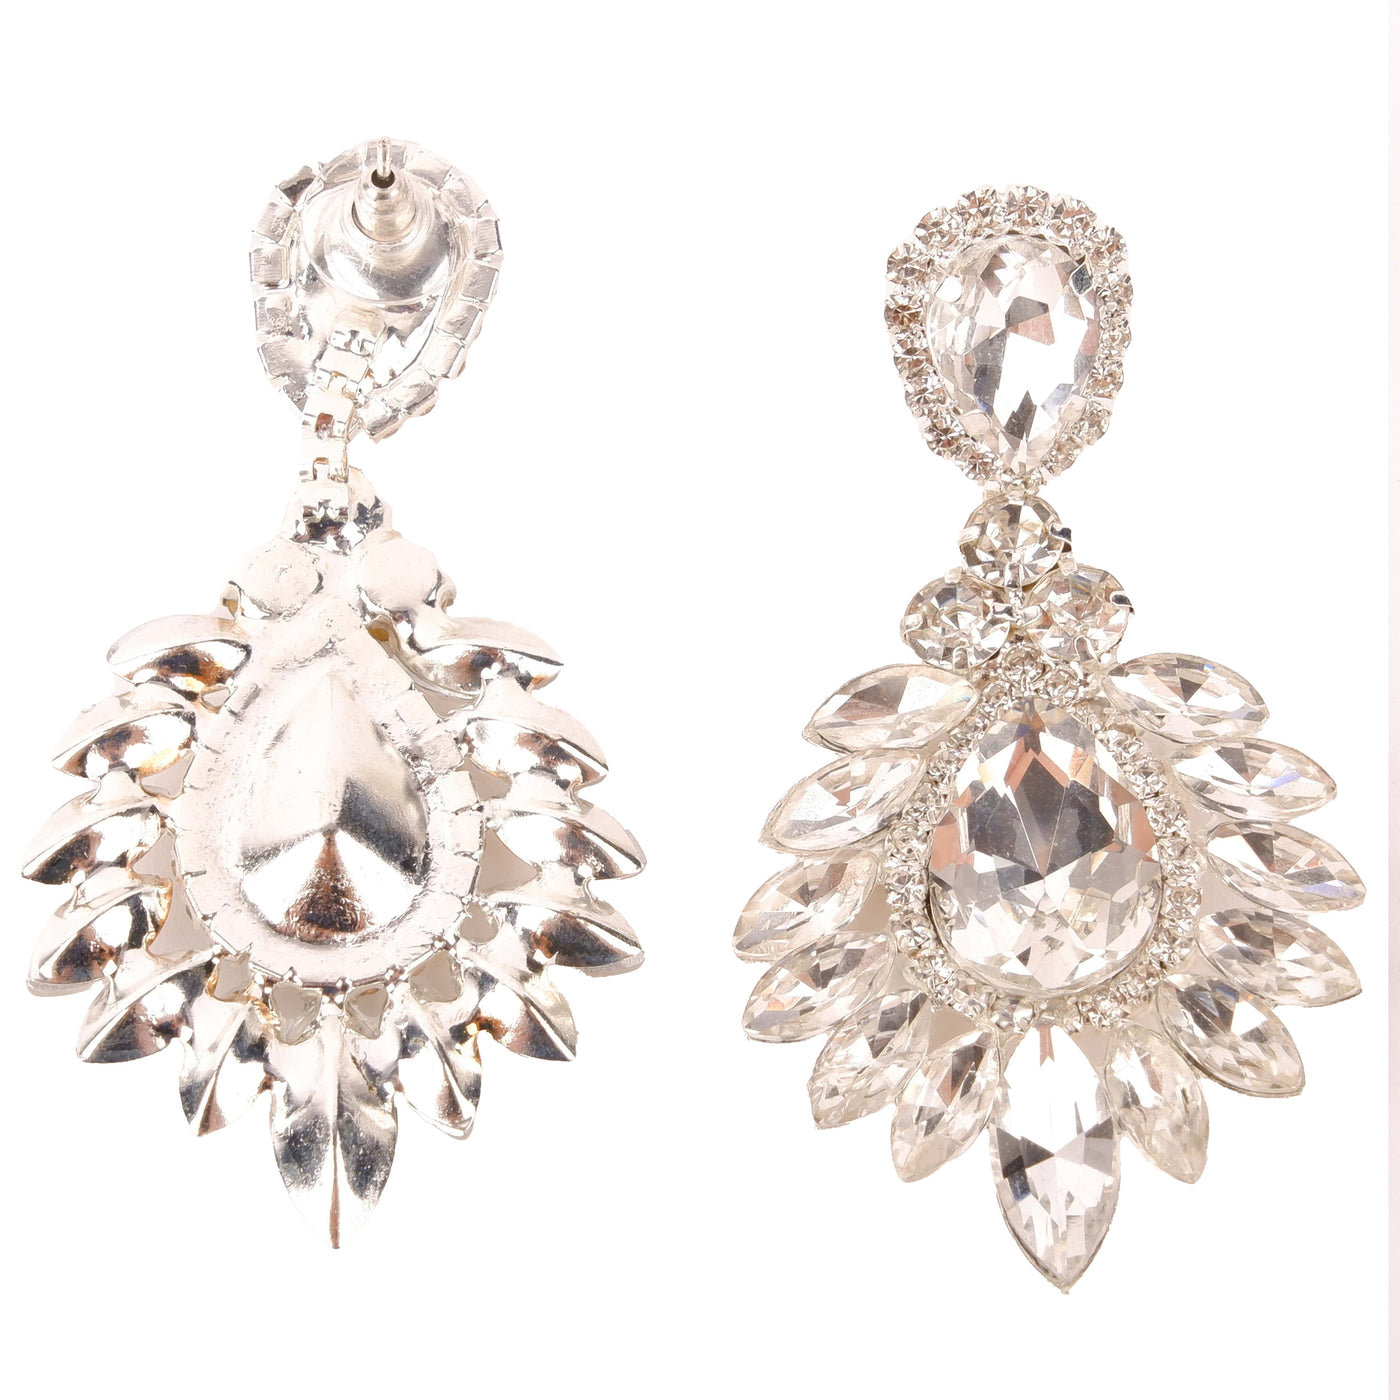 Lightweight Elegant Bridal Wedding Earrings with Drop and Shuttle Design